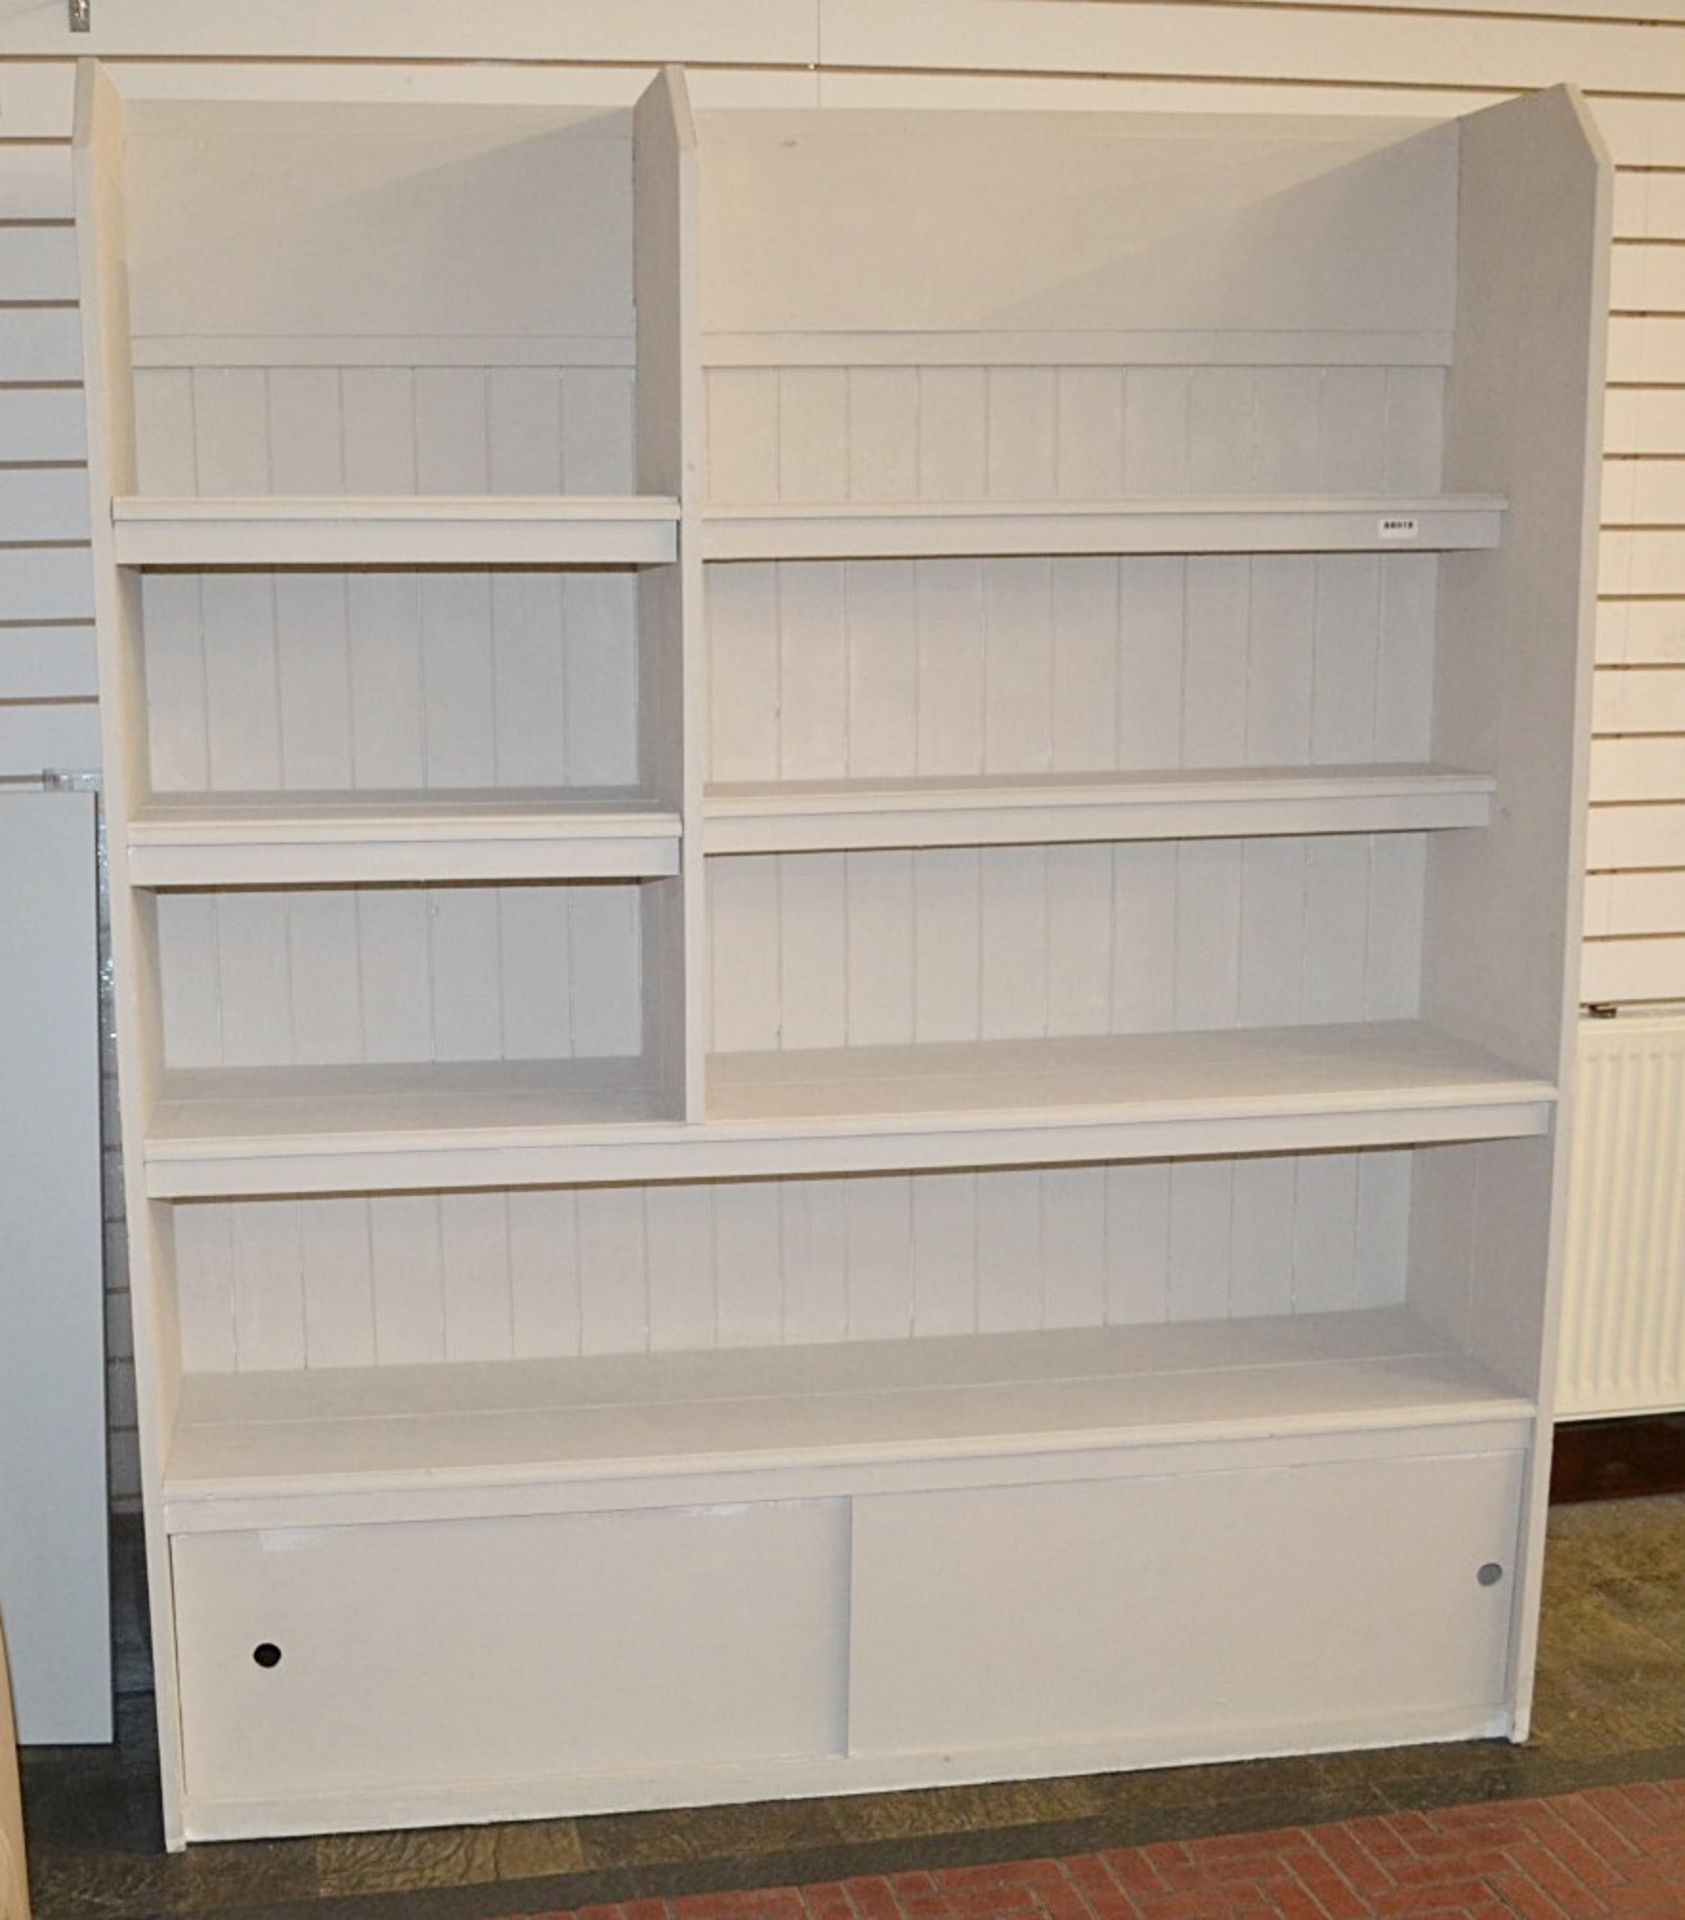 1 x Large 2-Metre Tall Painted Dresser Unit With 2 Sliding Door Storage And Paneled Back - Image 4 of 4